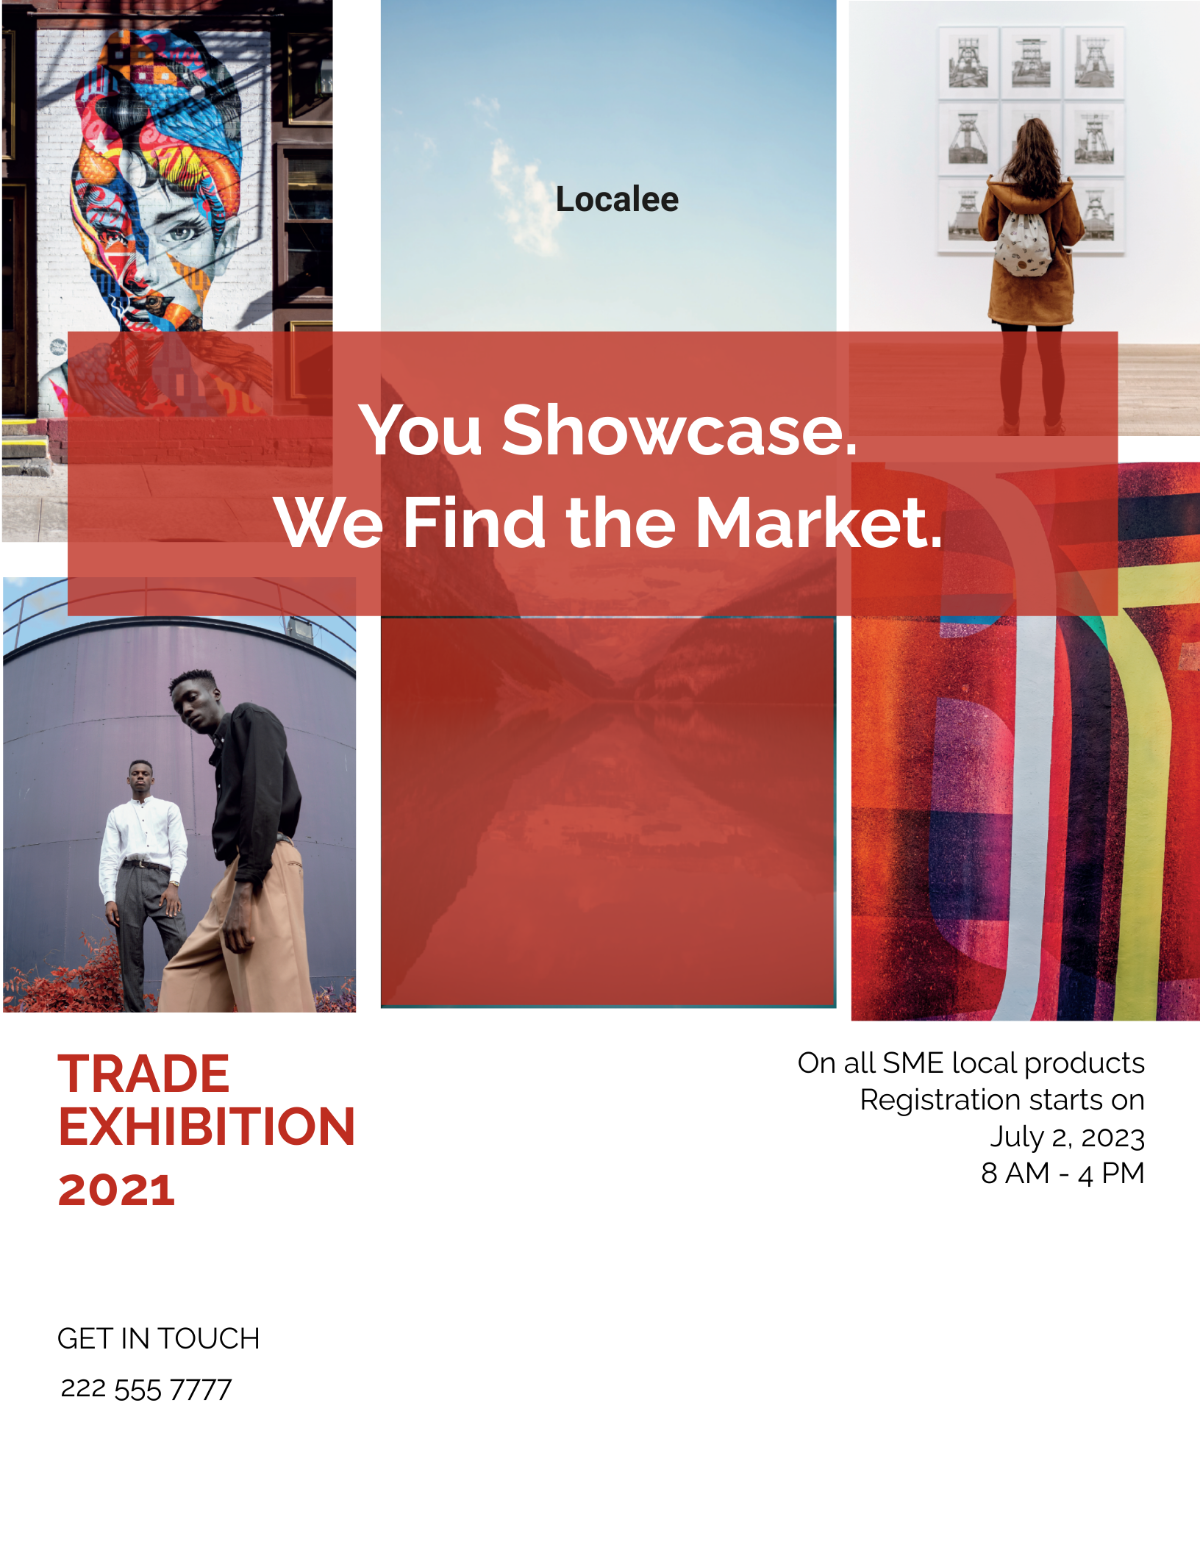 Exhibition Flyer Template